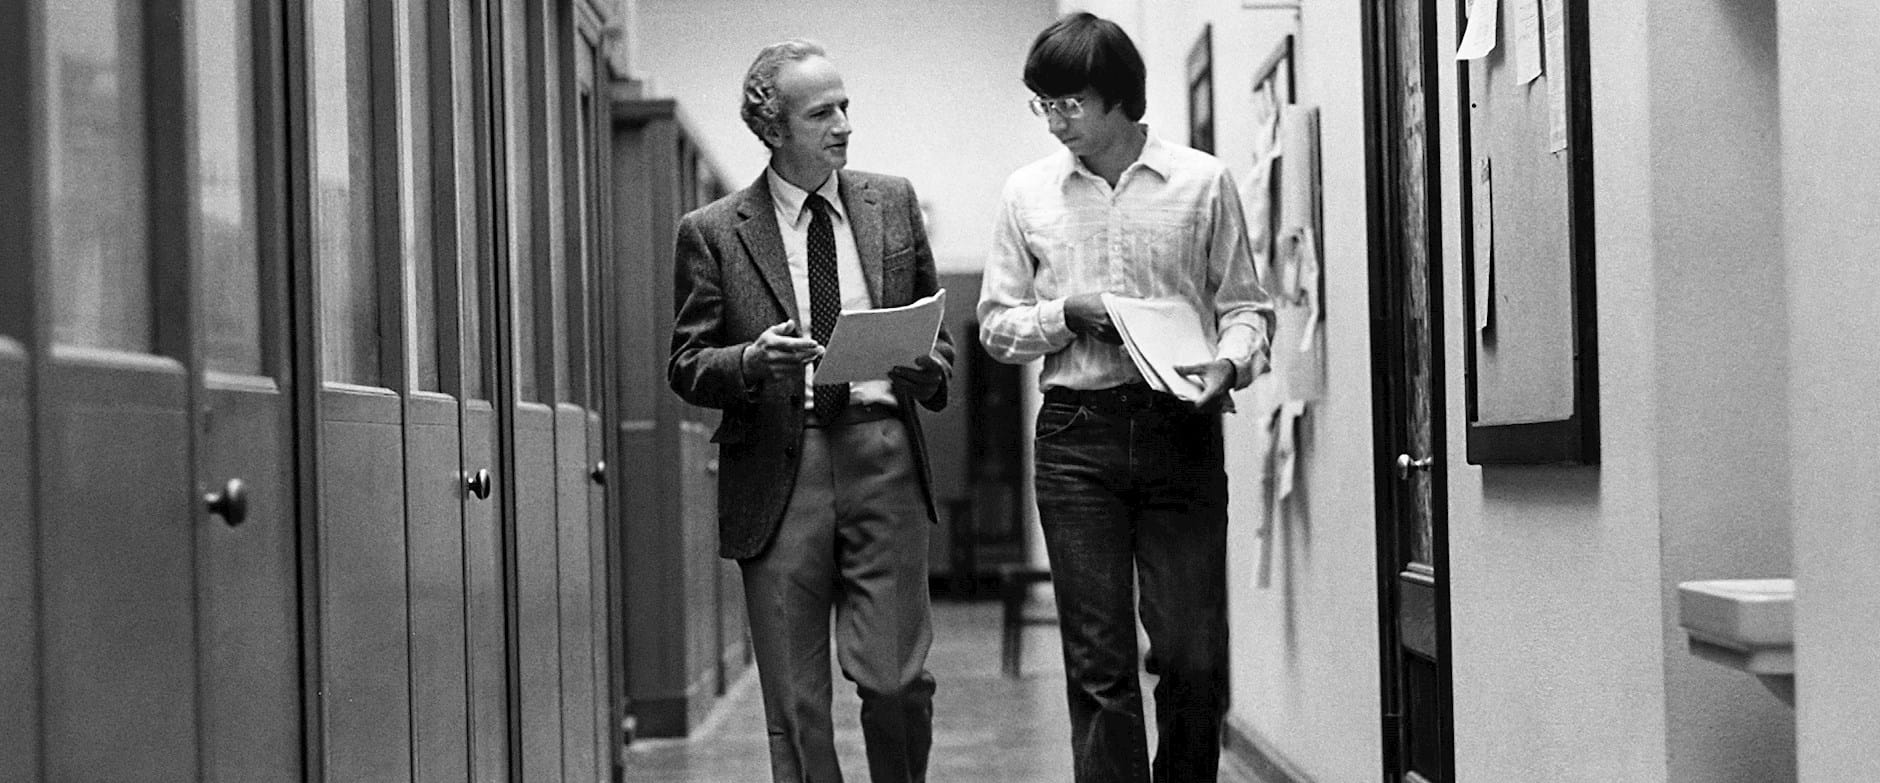 Gary Becker walking with a student down a hallway